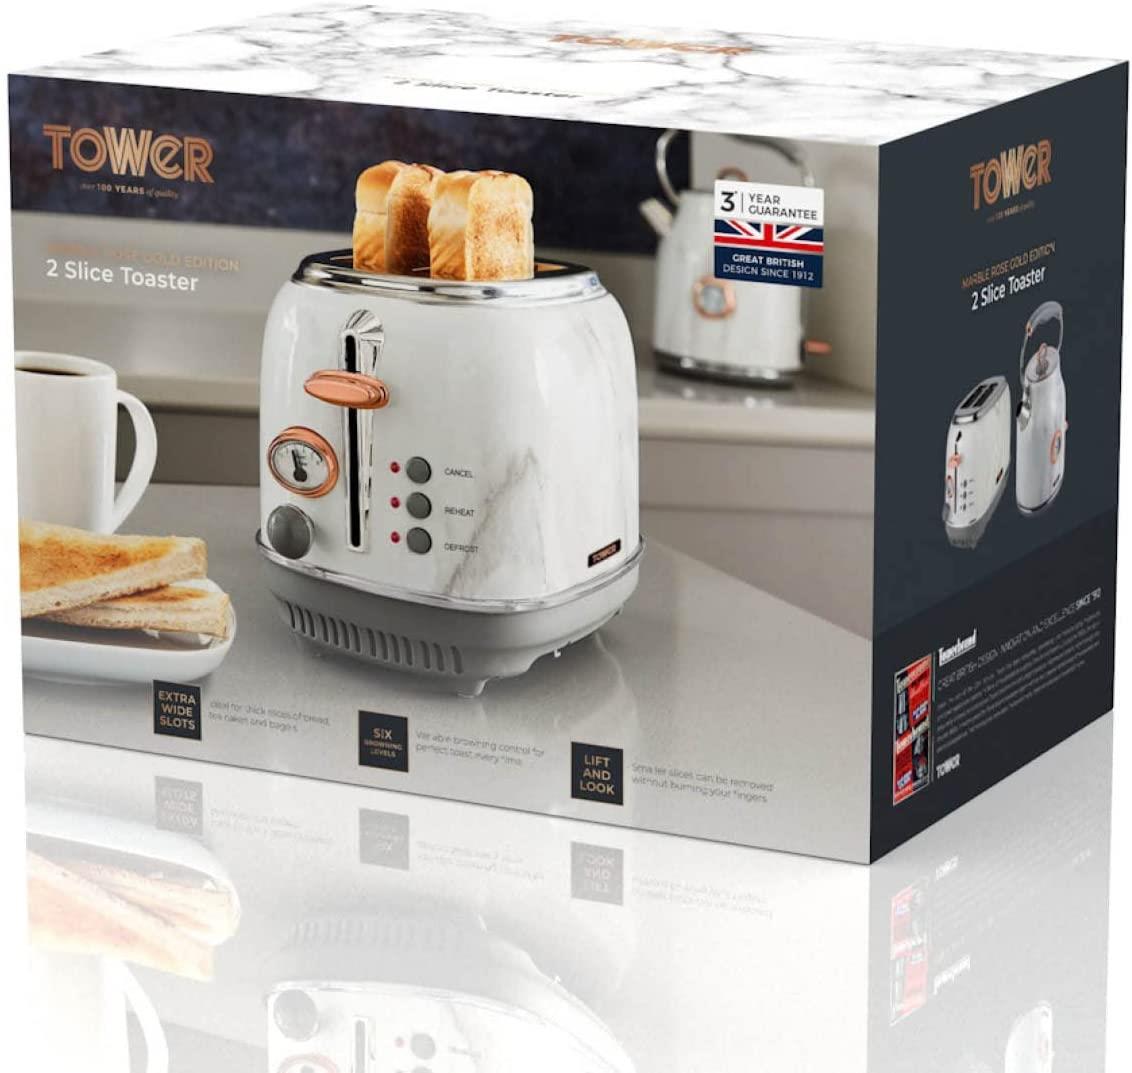 Tower 2 slice Stainless Steel Toaster with Adjustable Browning Control, Defrost and Reheat Settings, White Marble and Rose Gold- T20016wmrg